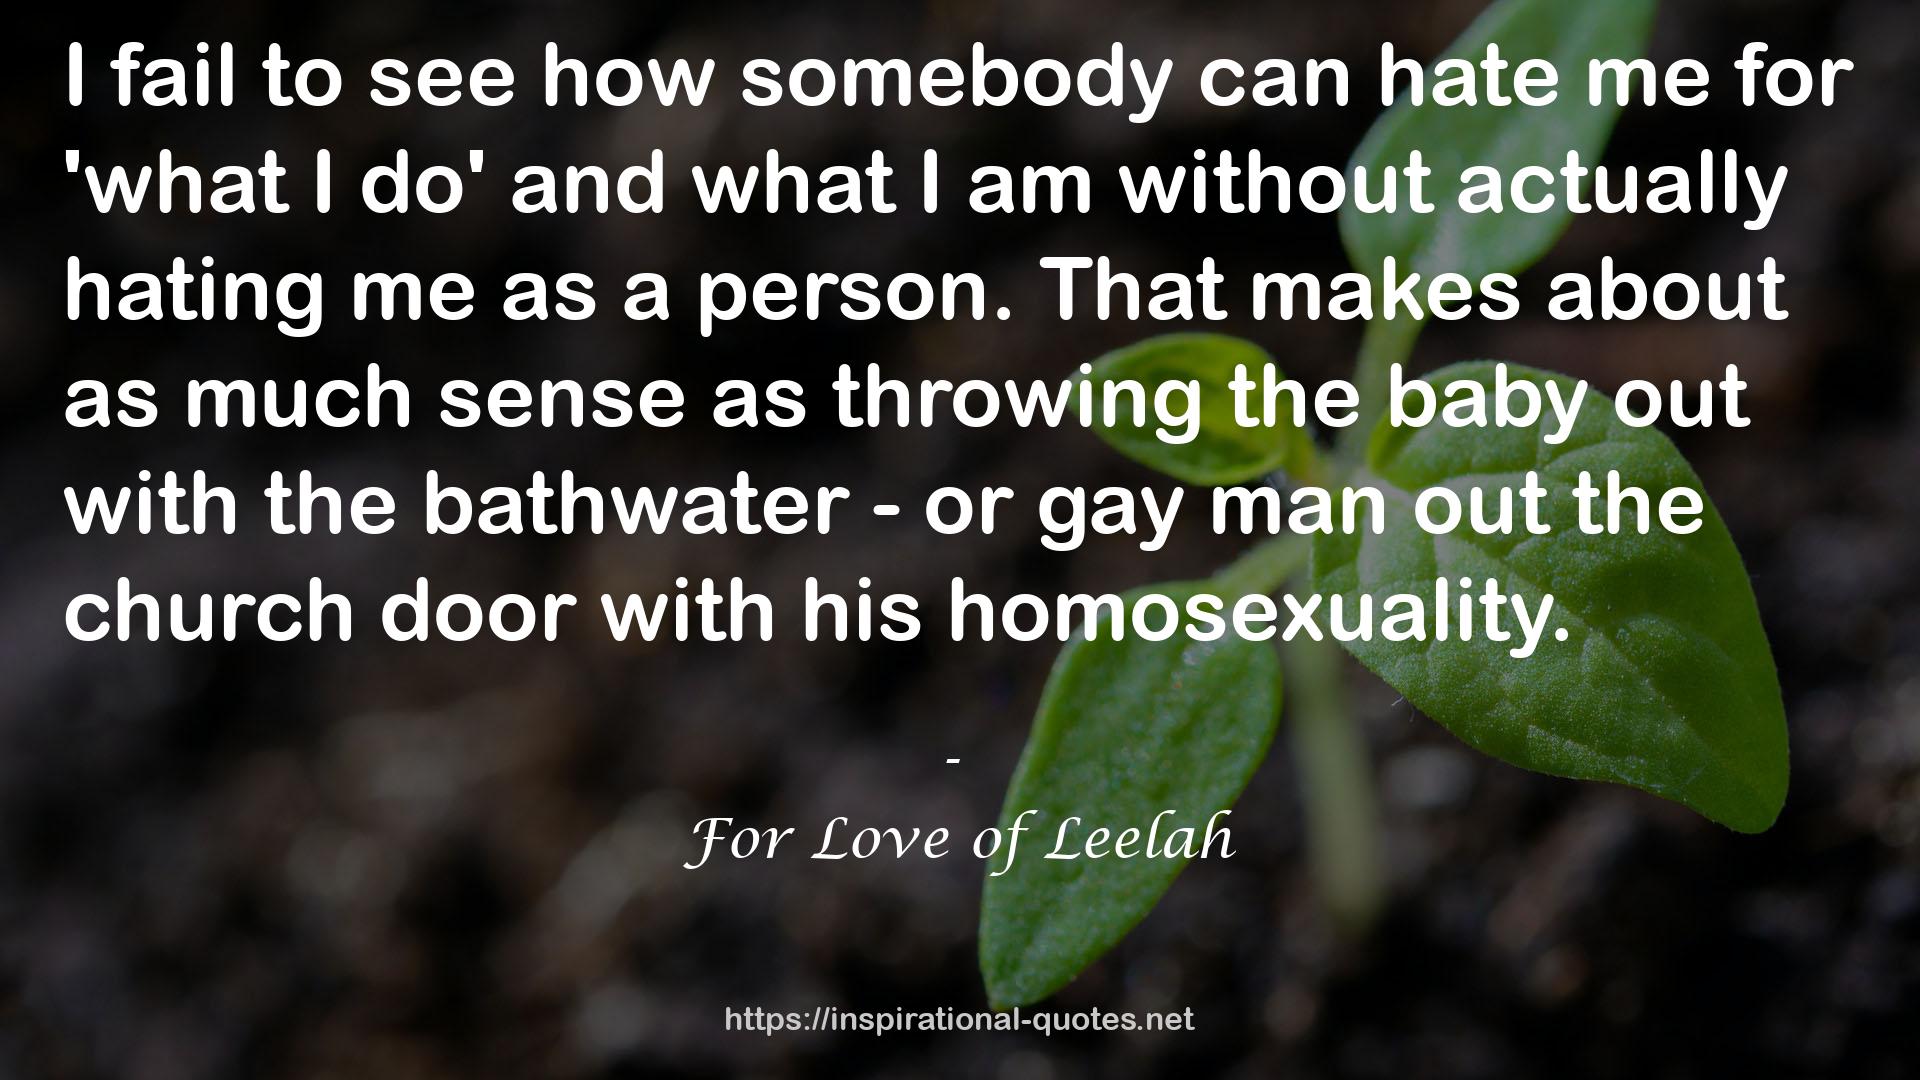 the bathwater - or gay man  QUOTES